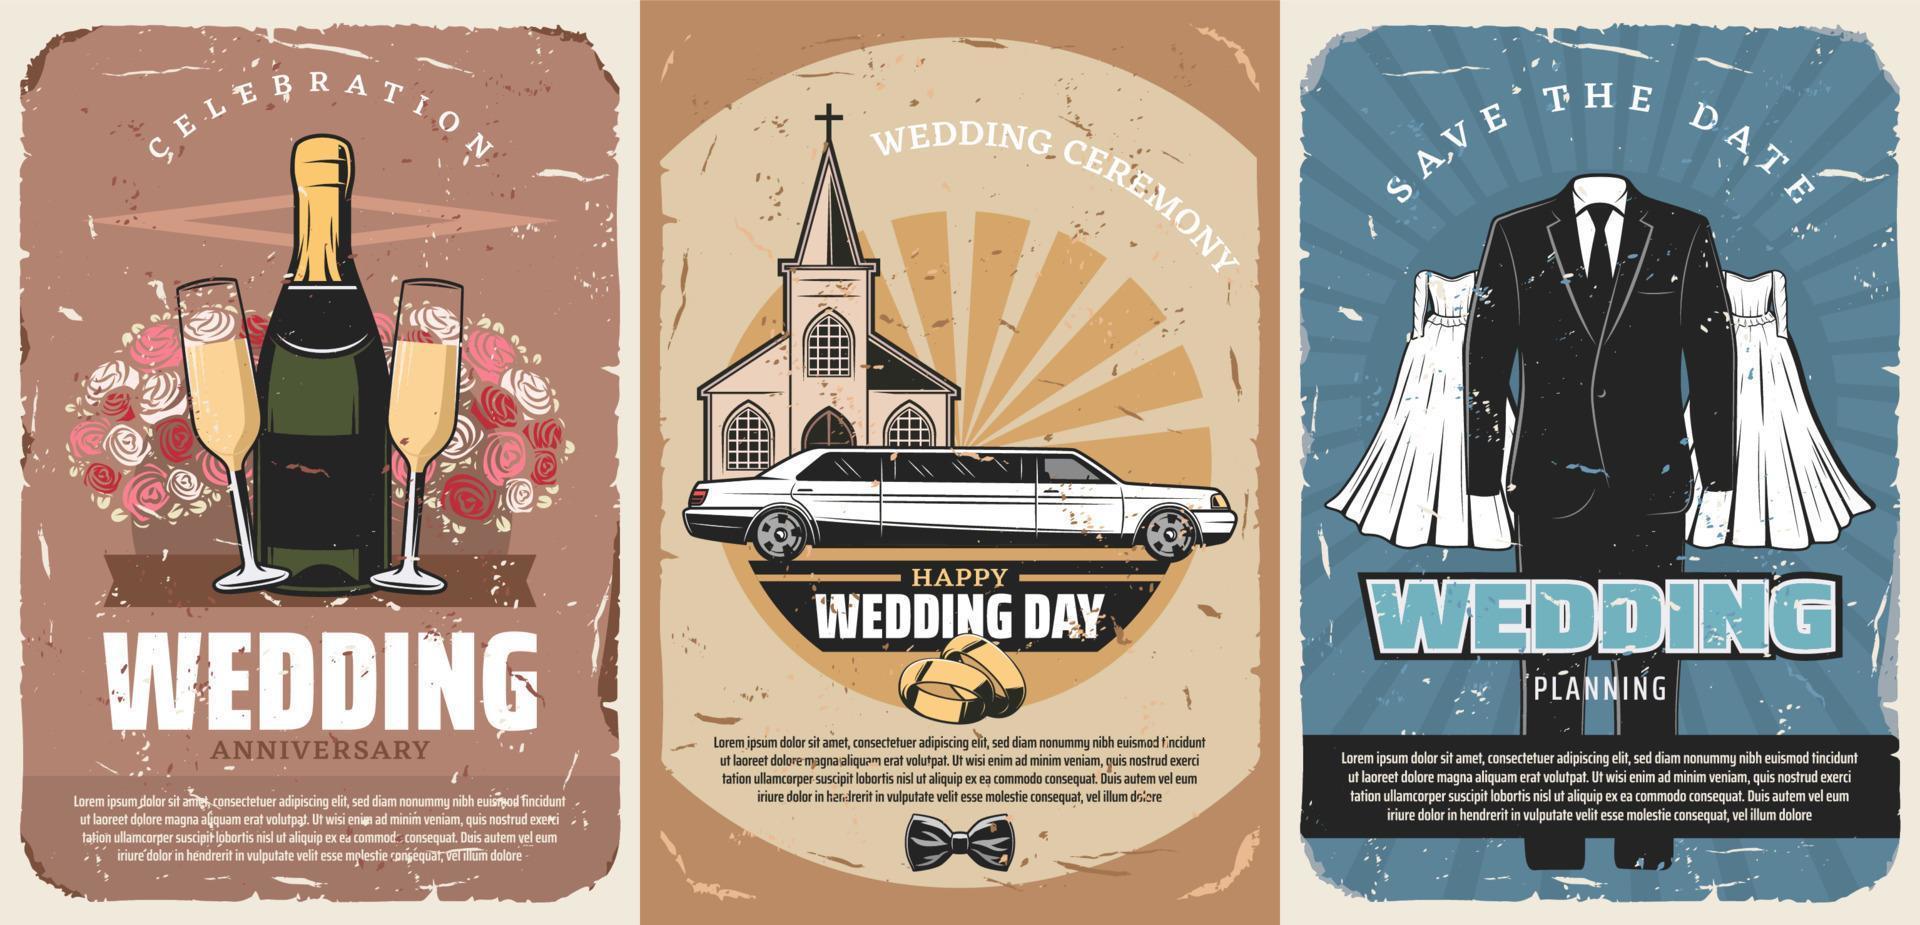 Marriage ceremony invitations or wedding posters vector